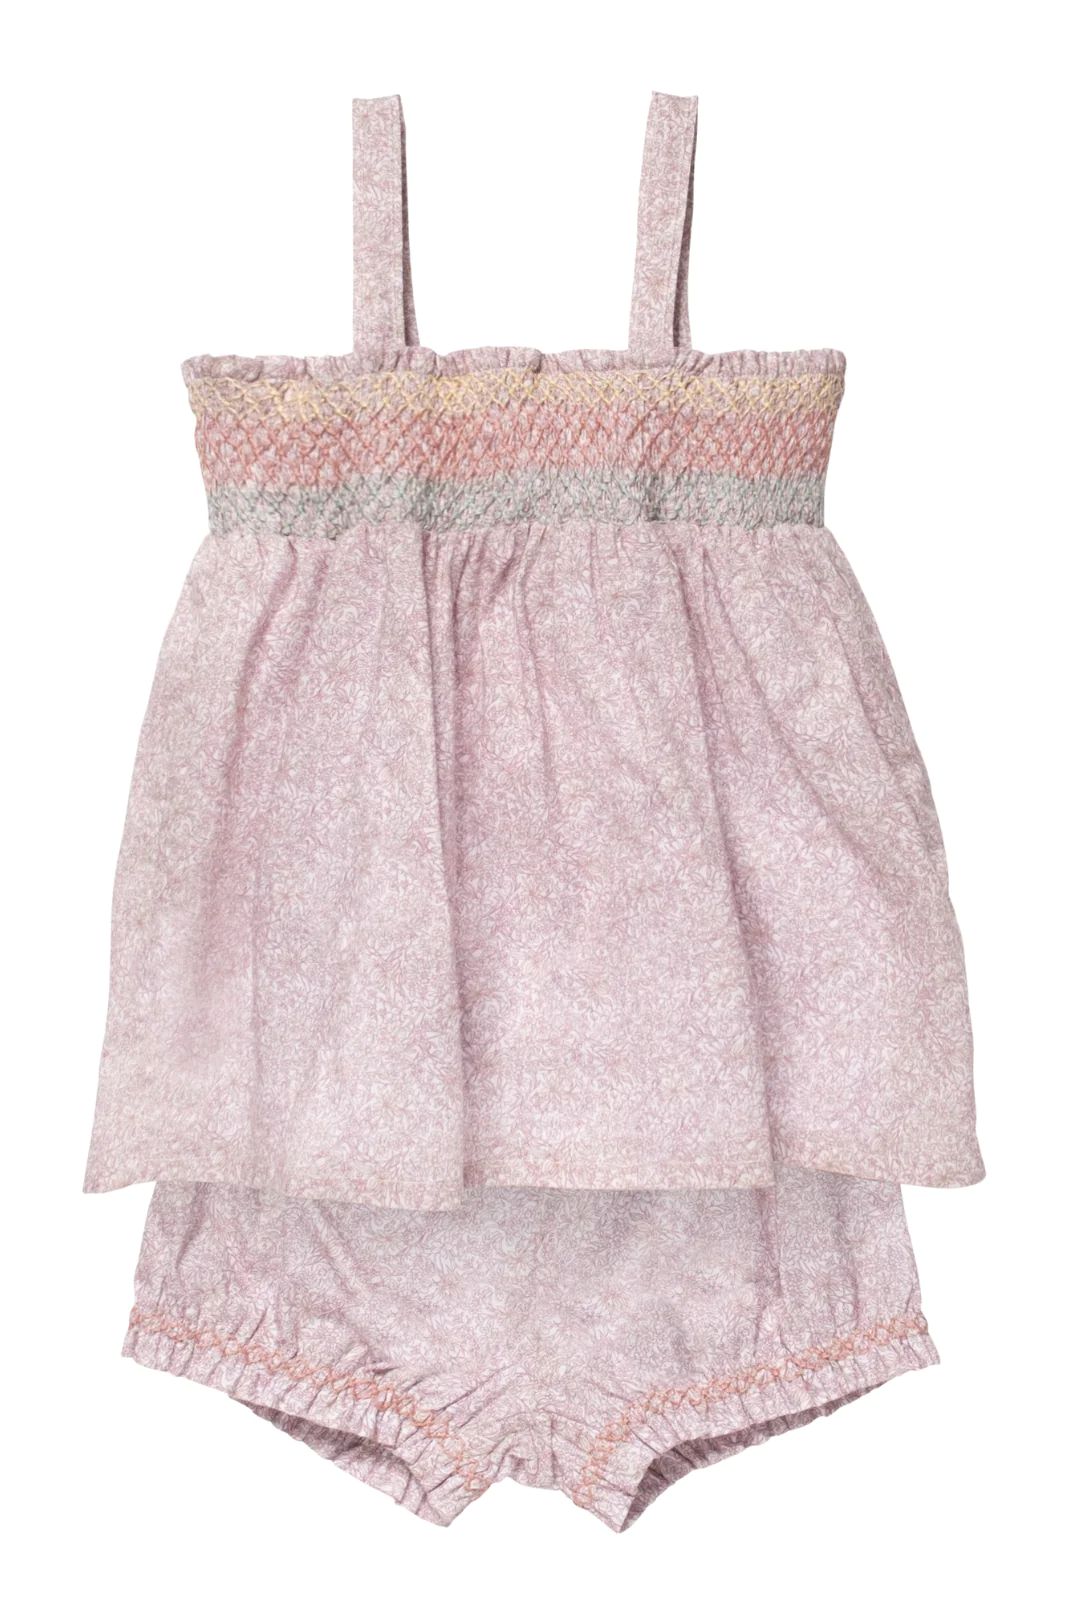 Rosie Baby Set in Scattered Blooms | Baybala